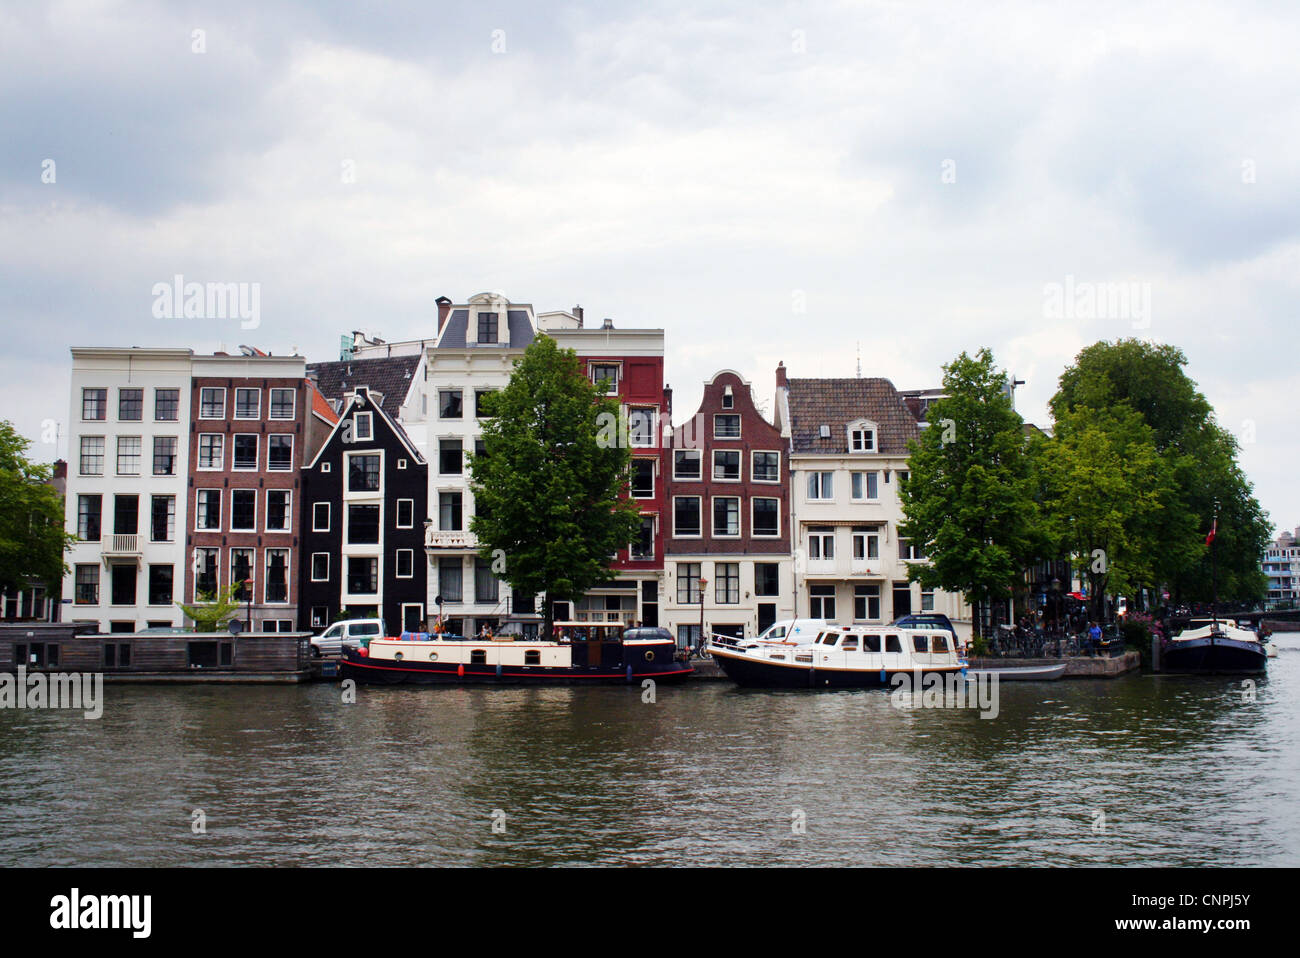 Typical Dutch architecture and buildings in Amsterdam Stock Photo